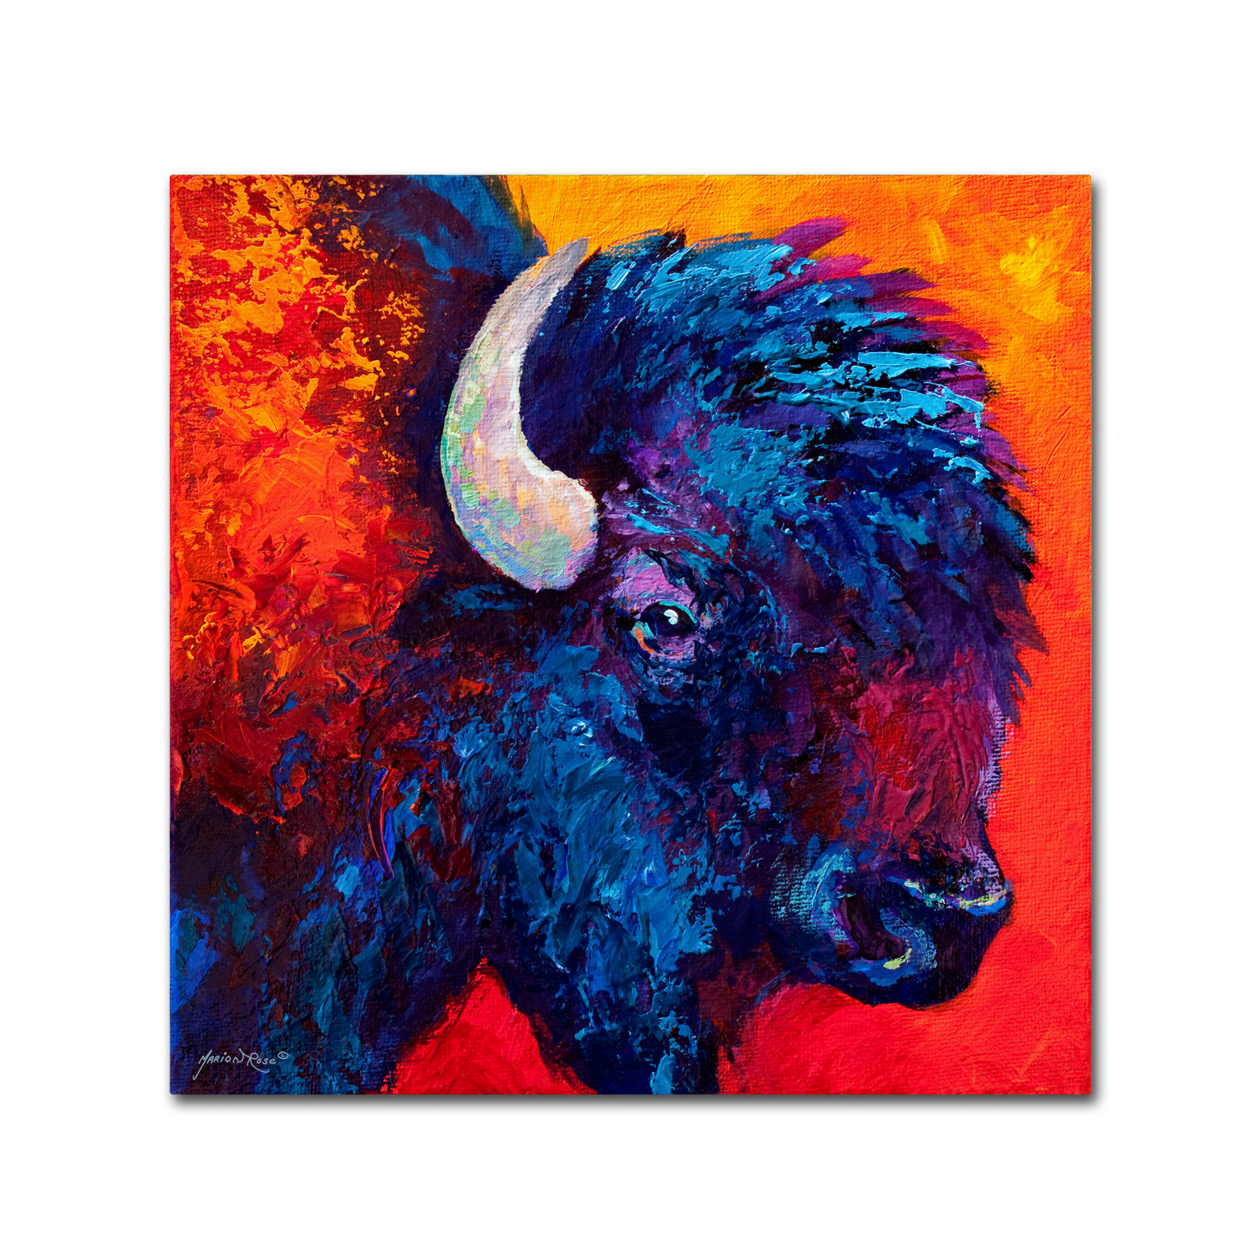 Marion Rose 'Bison Head II' Ready To Hang Canvas Art 24 X 24 Inches Made In USA